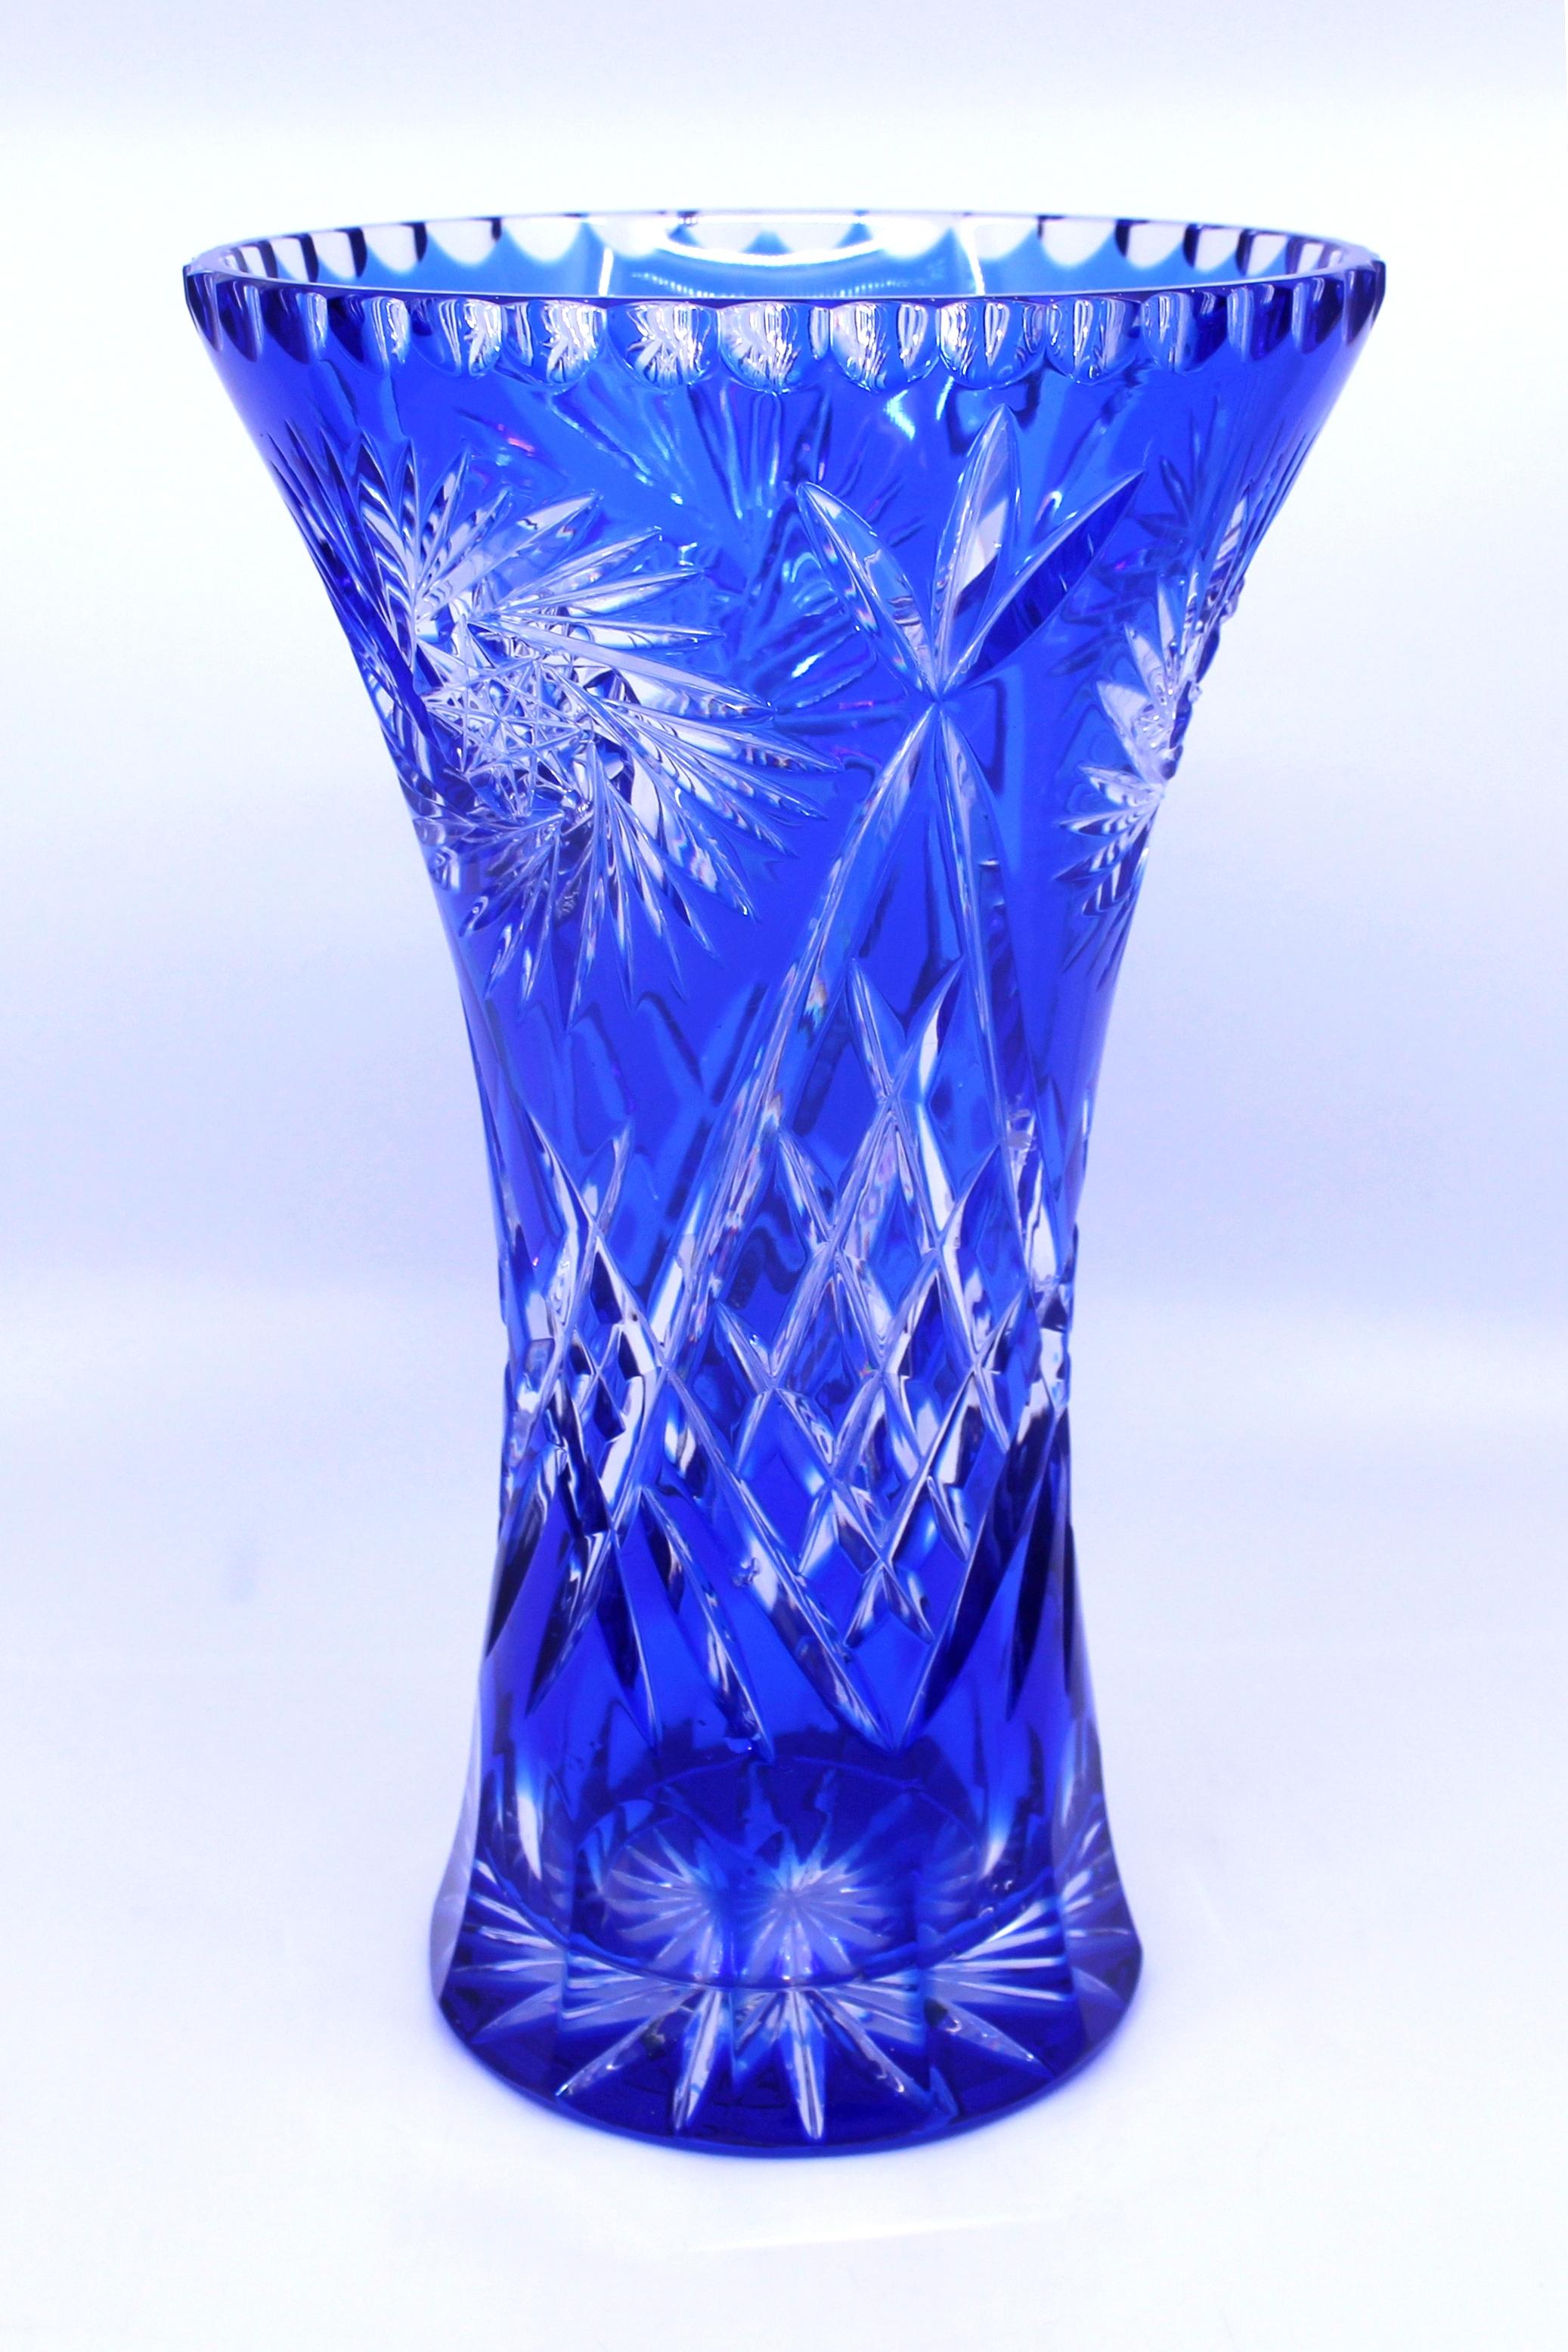 German blue overlay crystal 10 inch flower vase

Origin 
German

Composition 
Cut overlay crystal, blue

Condition 
Very good condition commensurate with age. No chips, cracks or repairs. Light scratches to base commensurate with age
 

